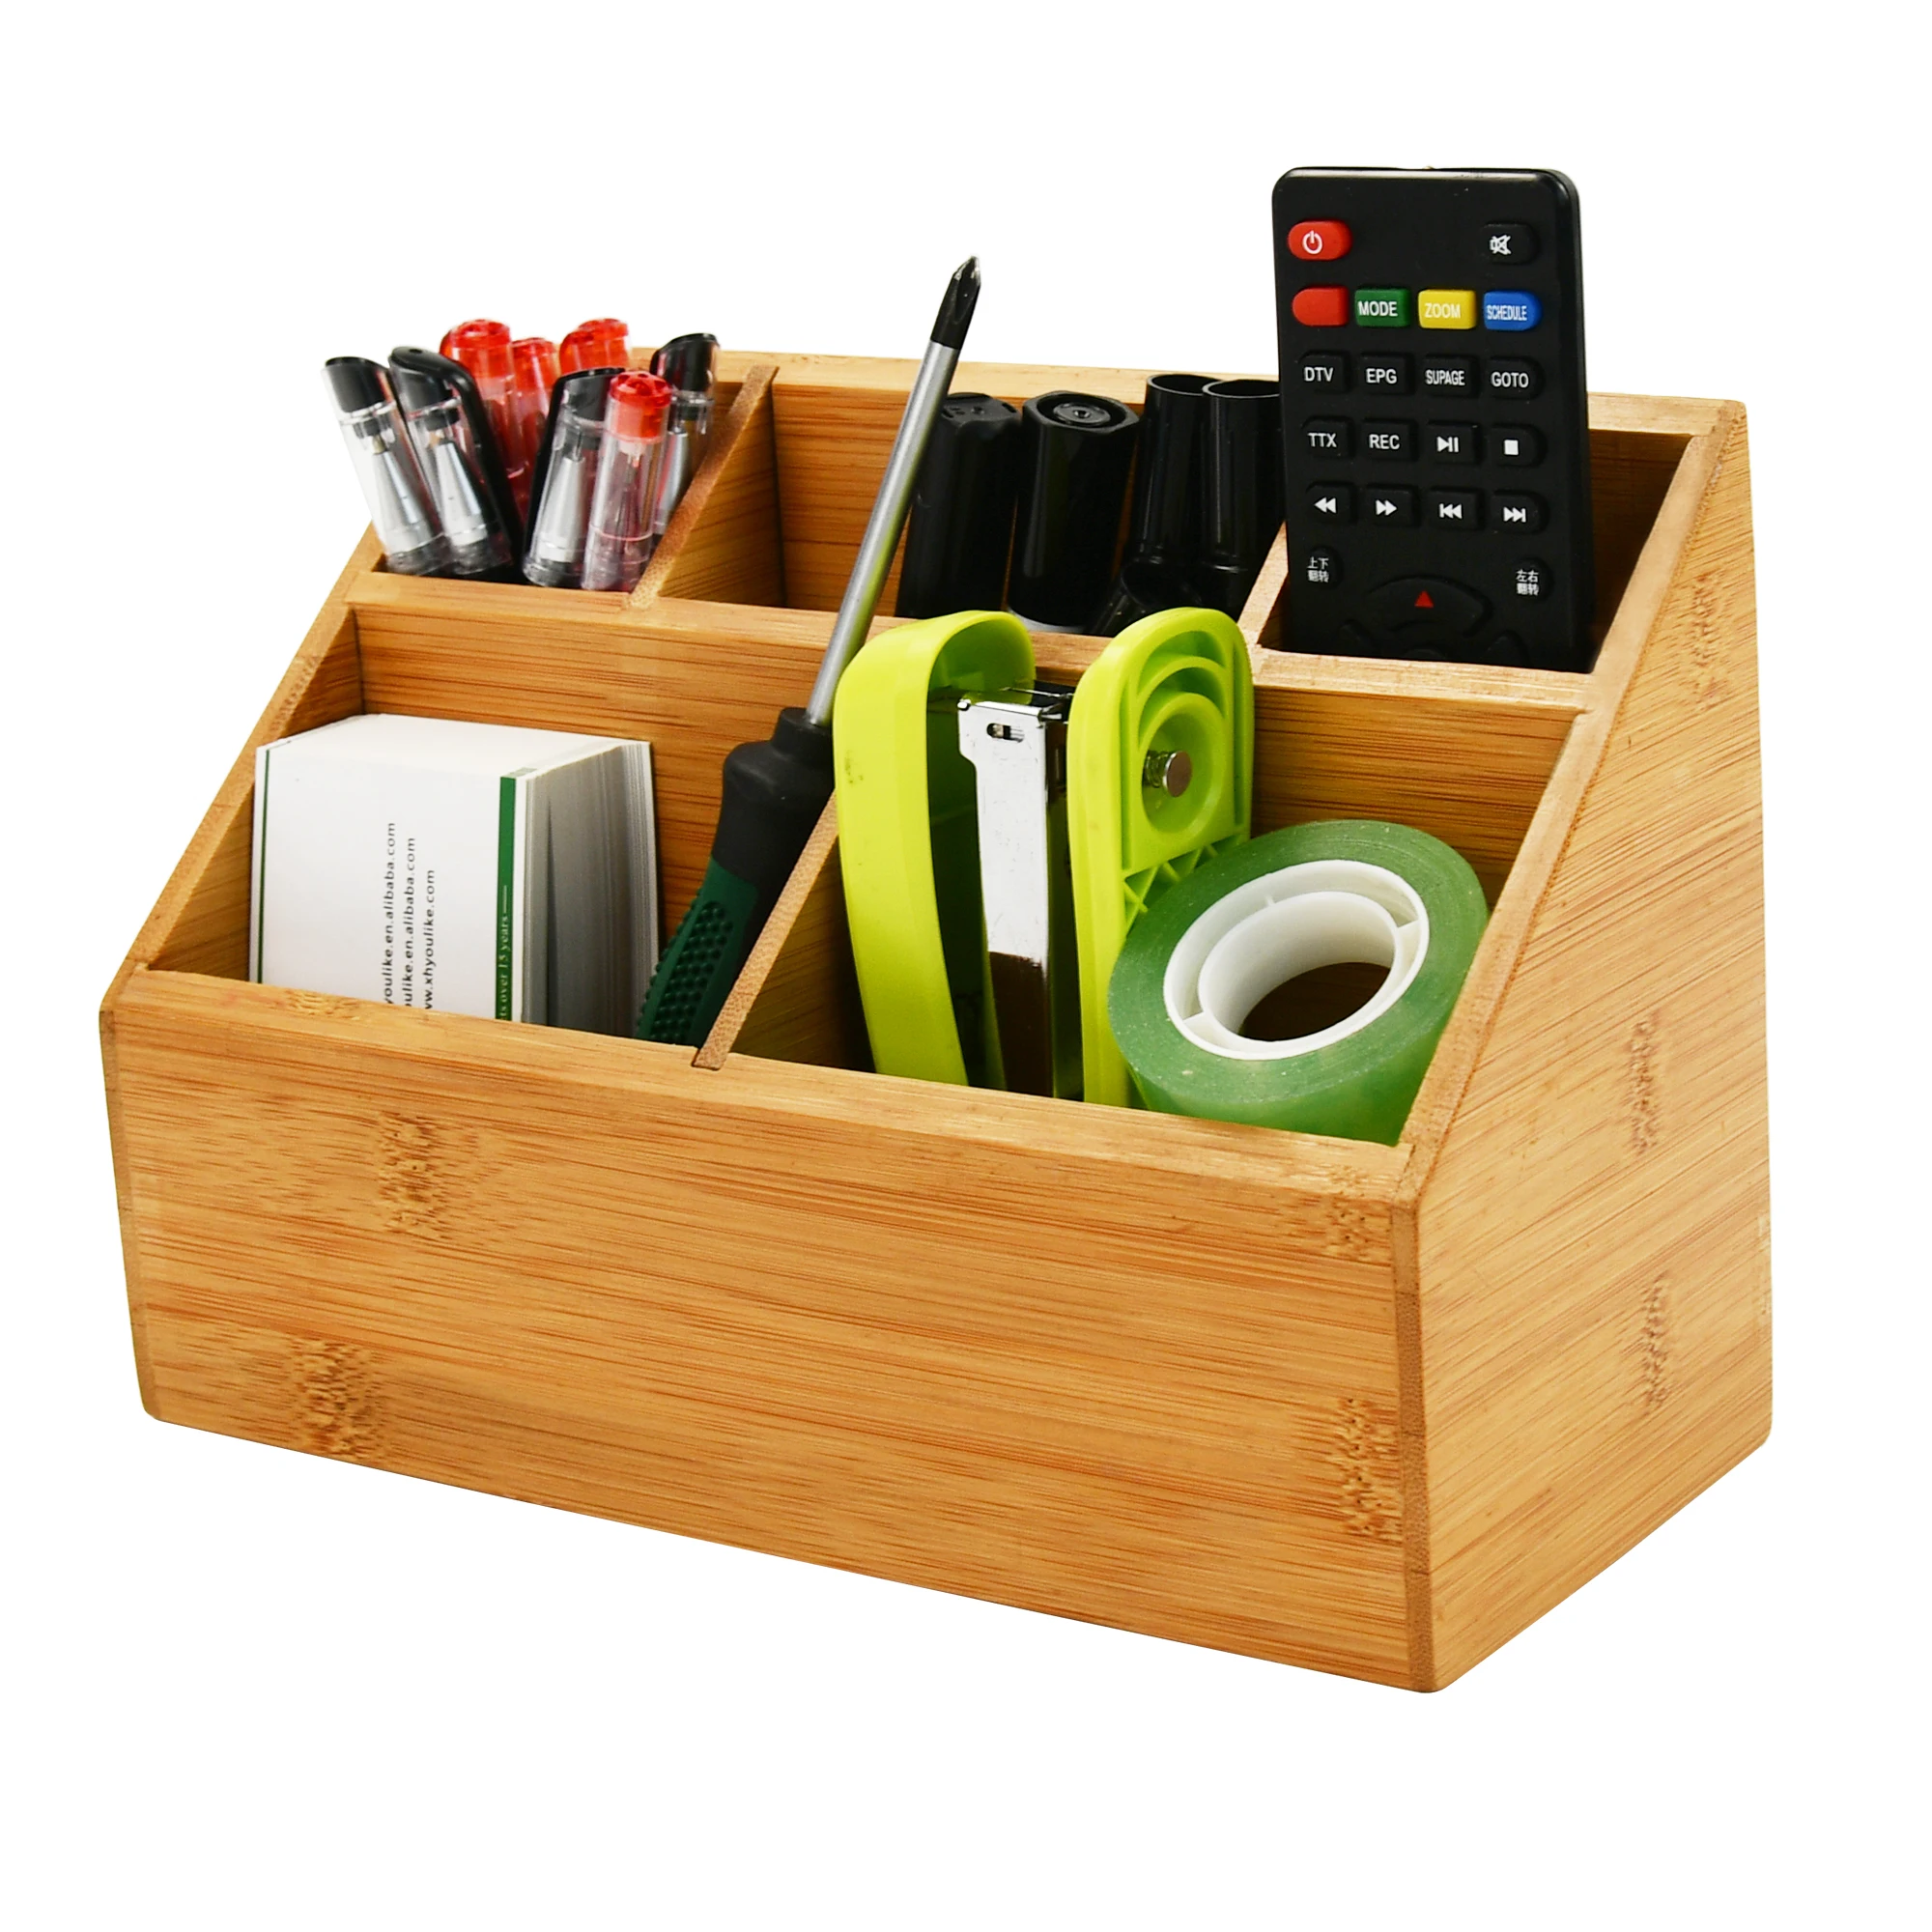 YOULIKE Wood Desktop Stationery and Office Supplies Organizer Bamboo Mail Holder Letters Bills Sorter Desk Caddy